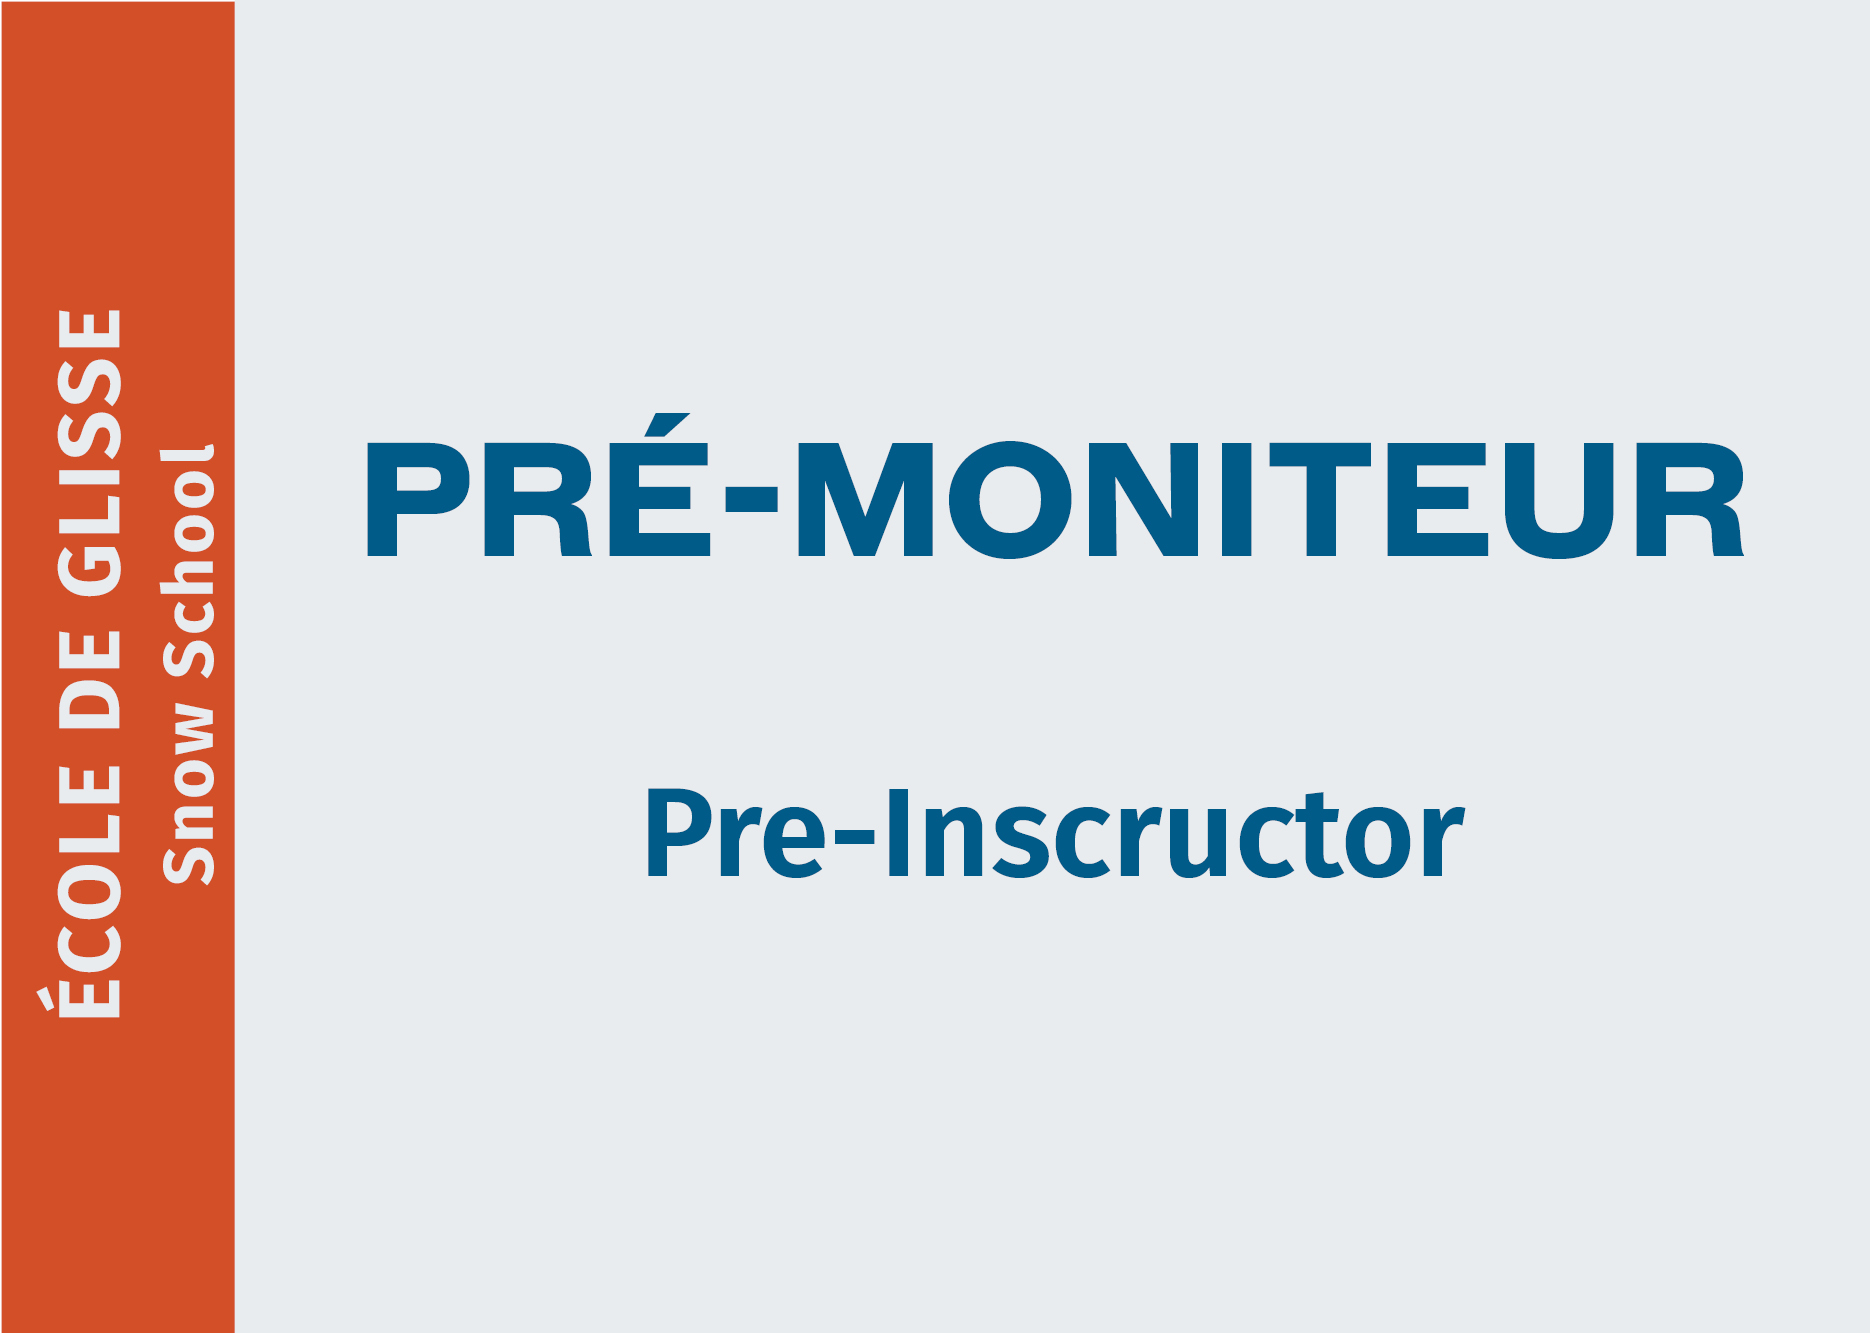 Pre-Instructor